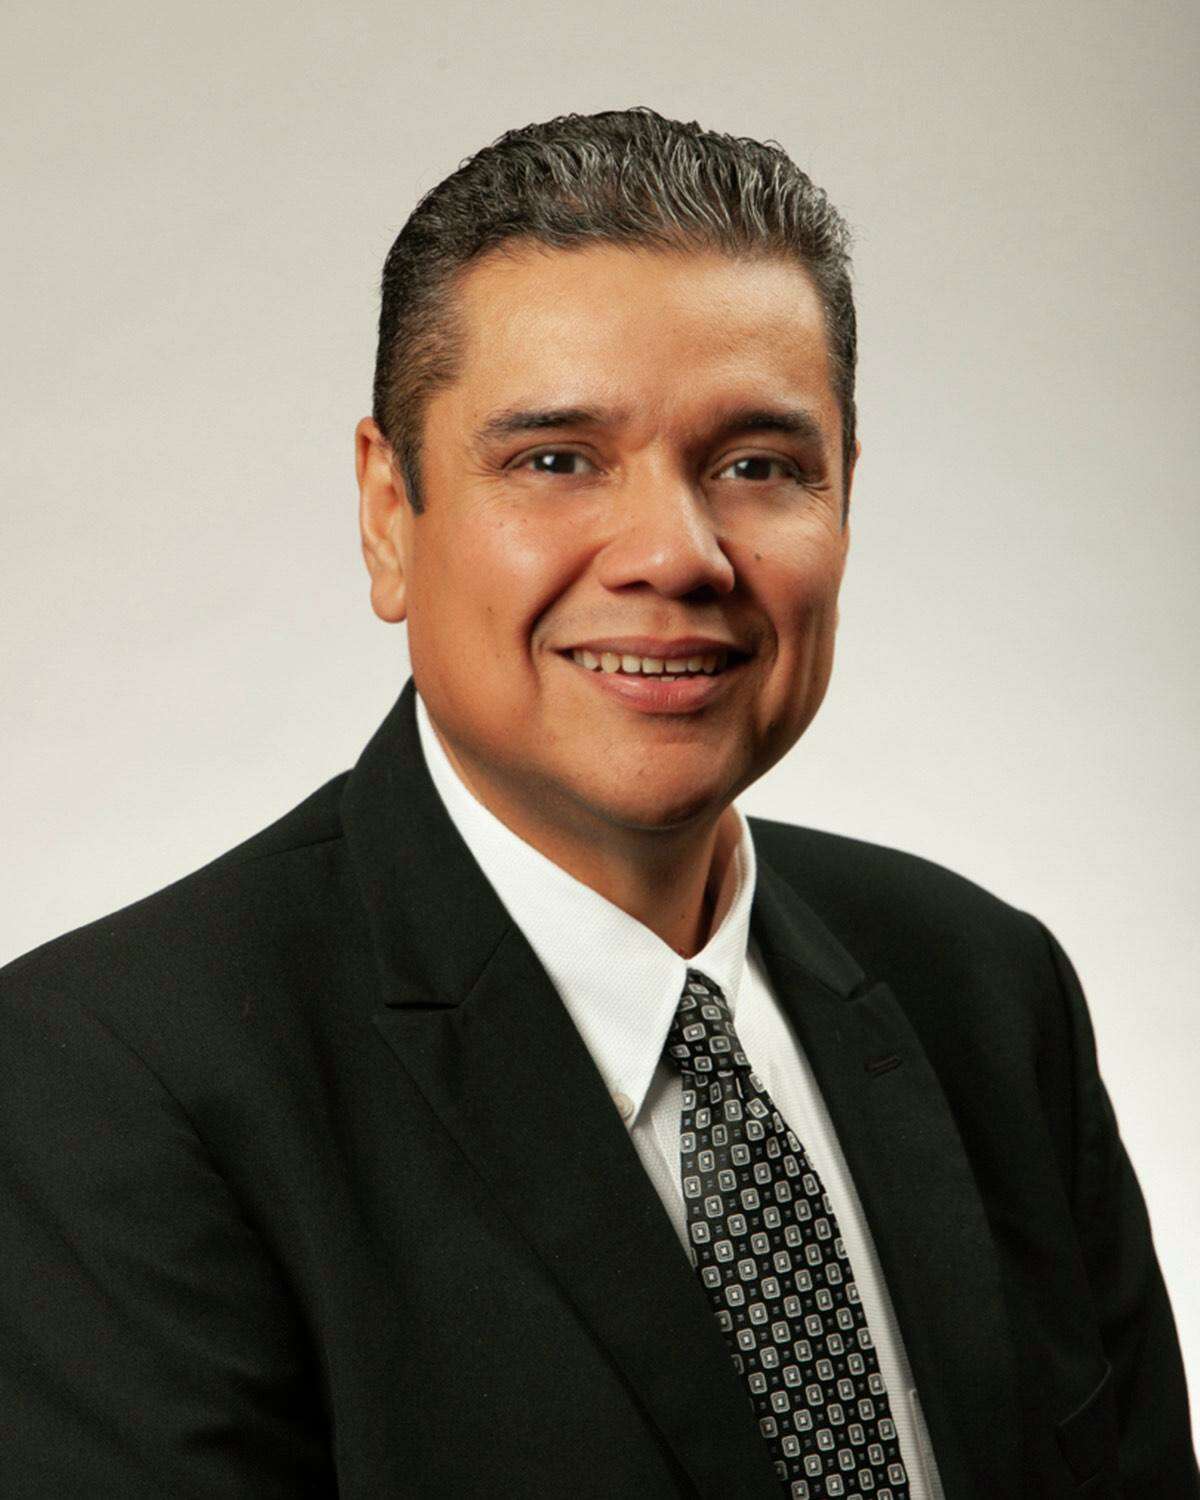 Jesus “Jesse” Hernandez, 45, was appointed to the Southside ISD board by the Texas education commissioner and hopes to stay on the board after the May 1 election.